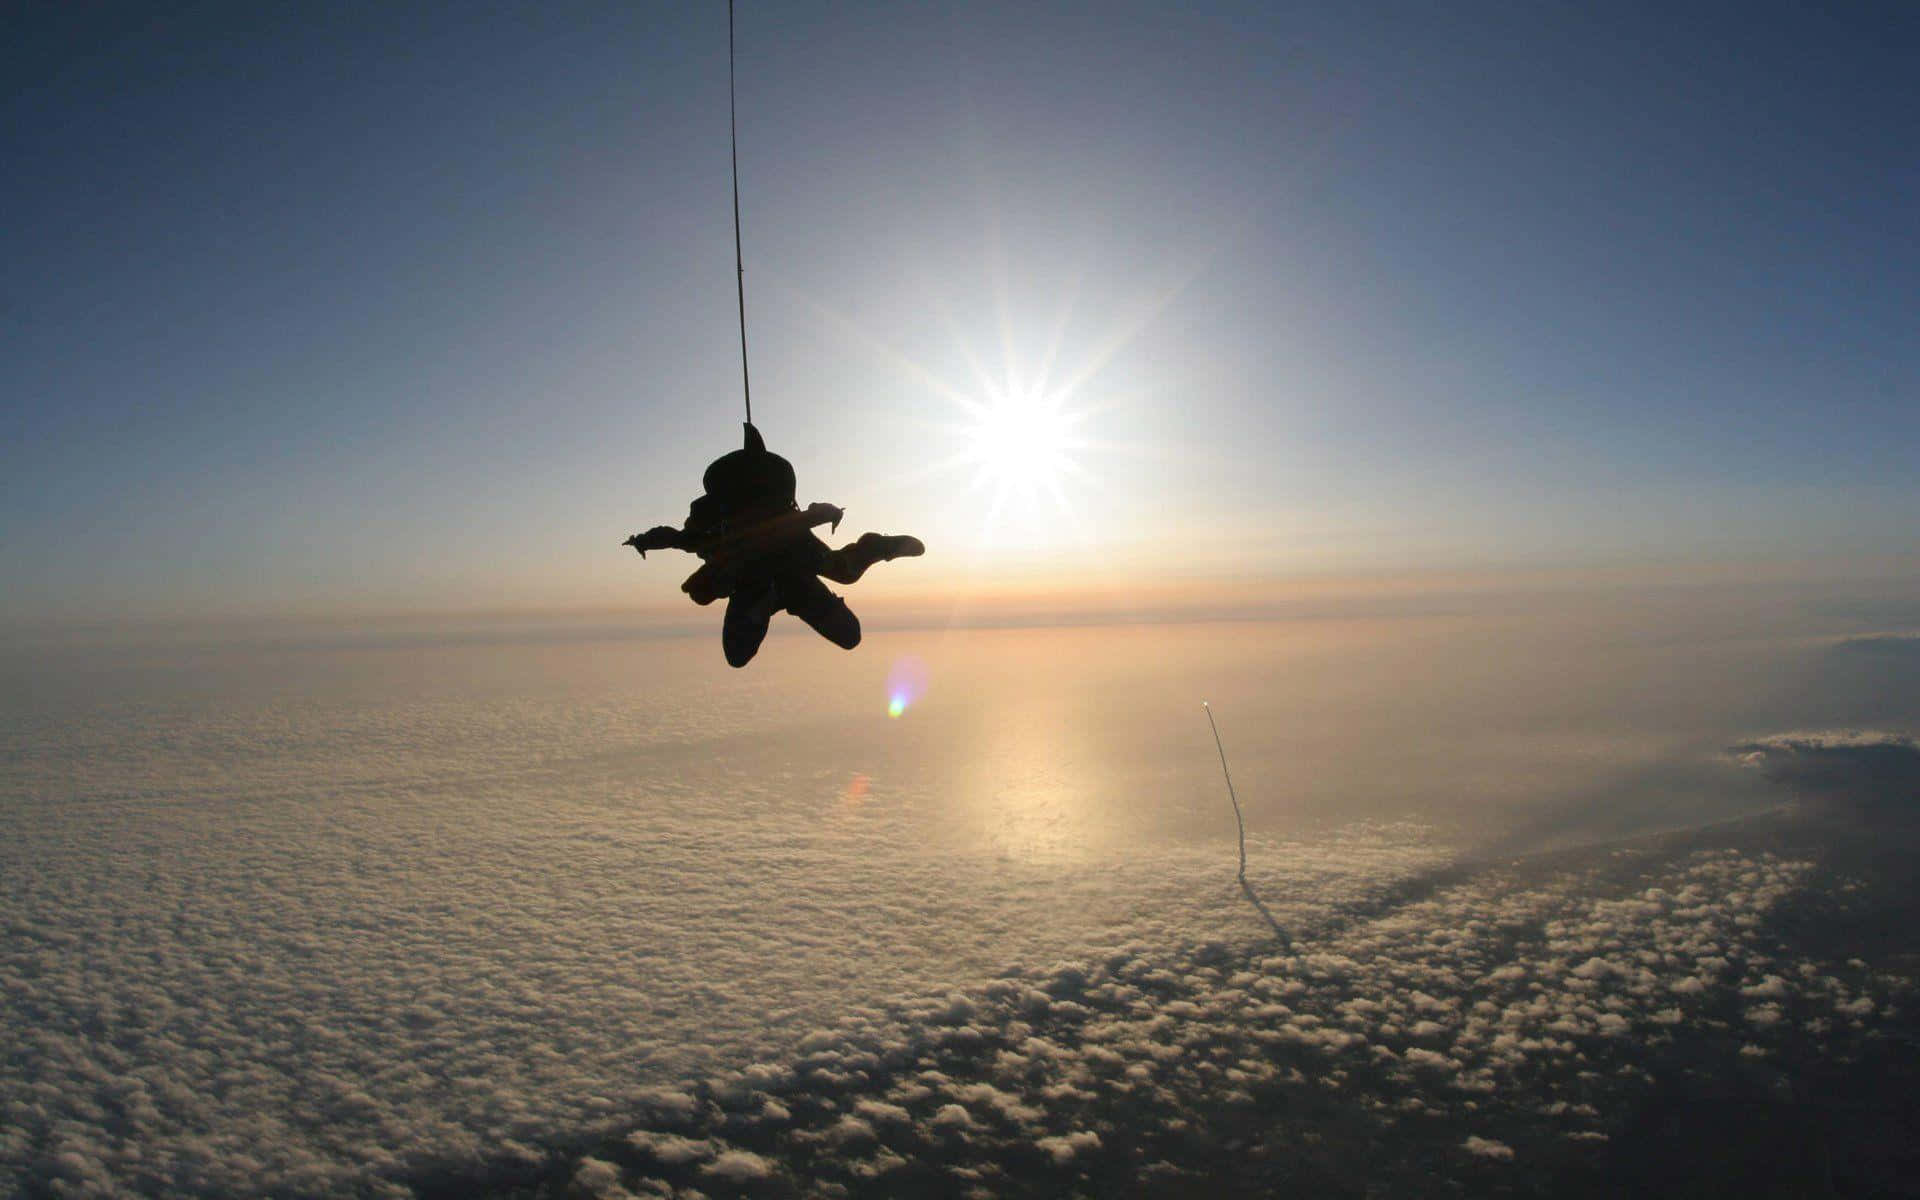 FREEDOM IN THE SKY - Enjoy the sensation of true freedom by skydiving from great heights.